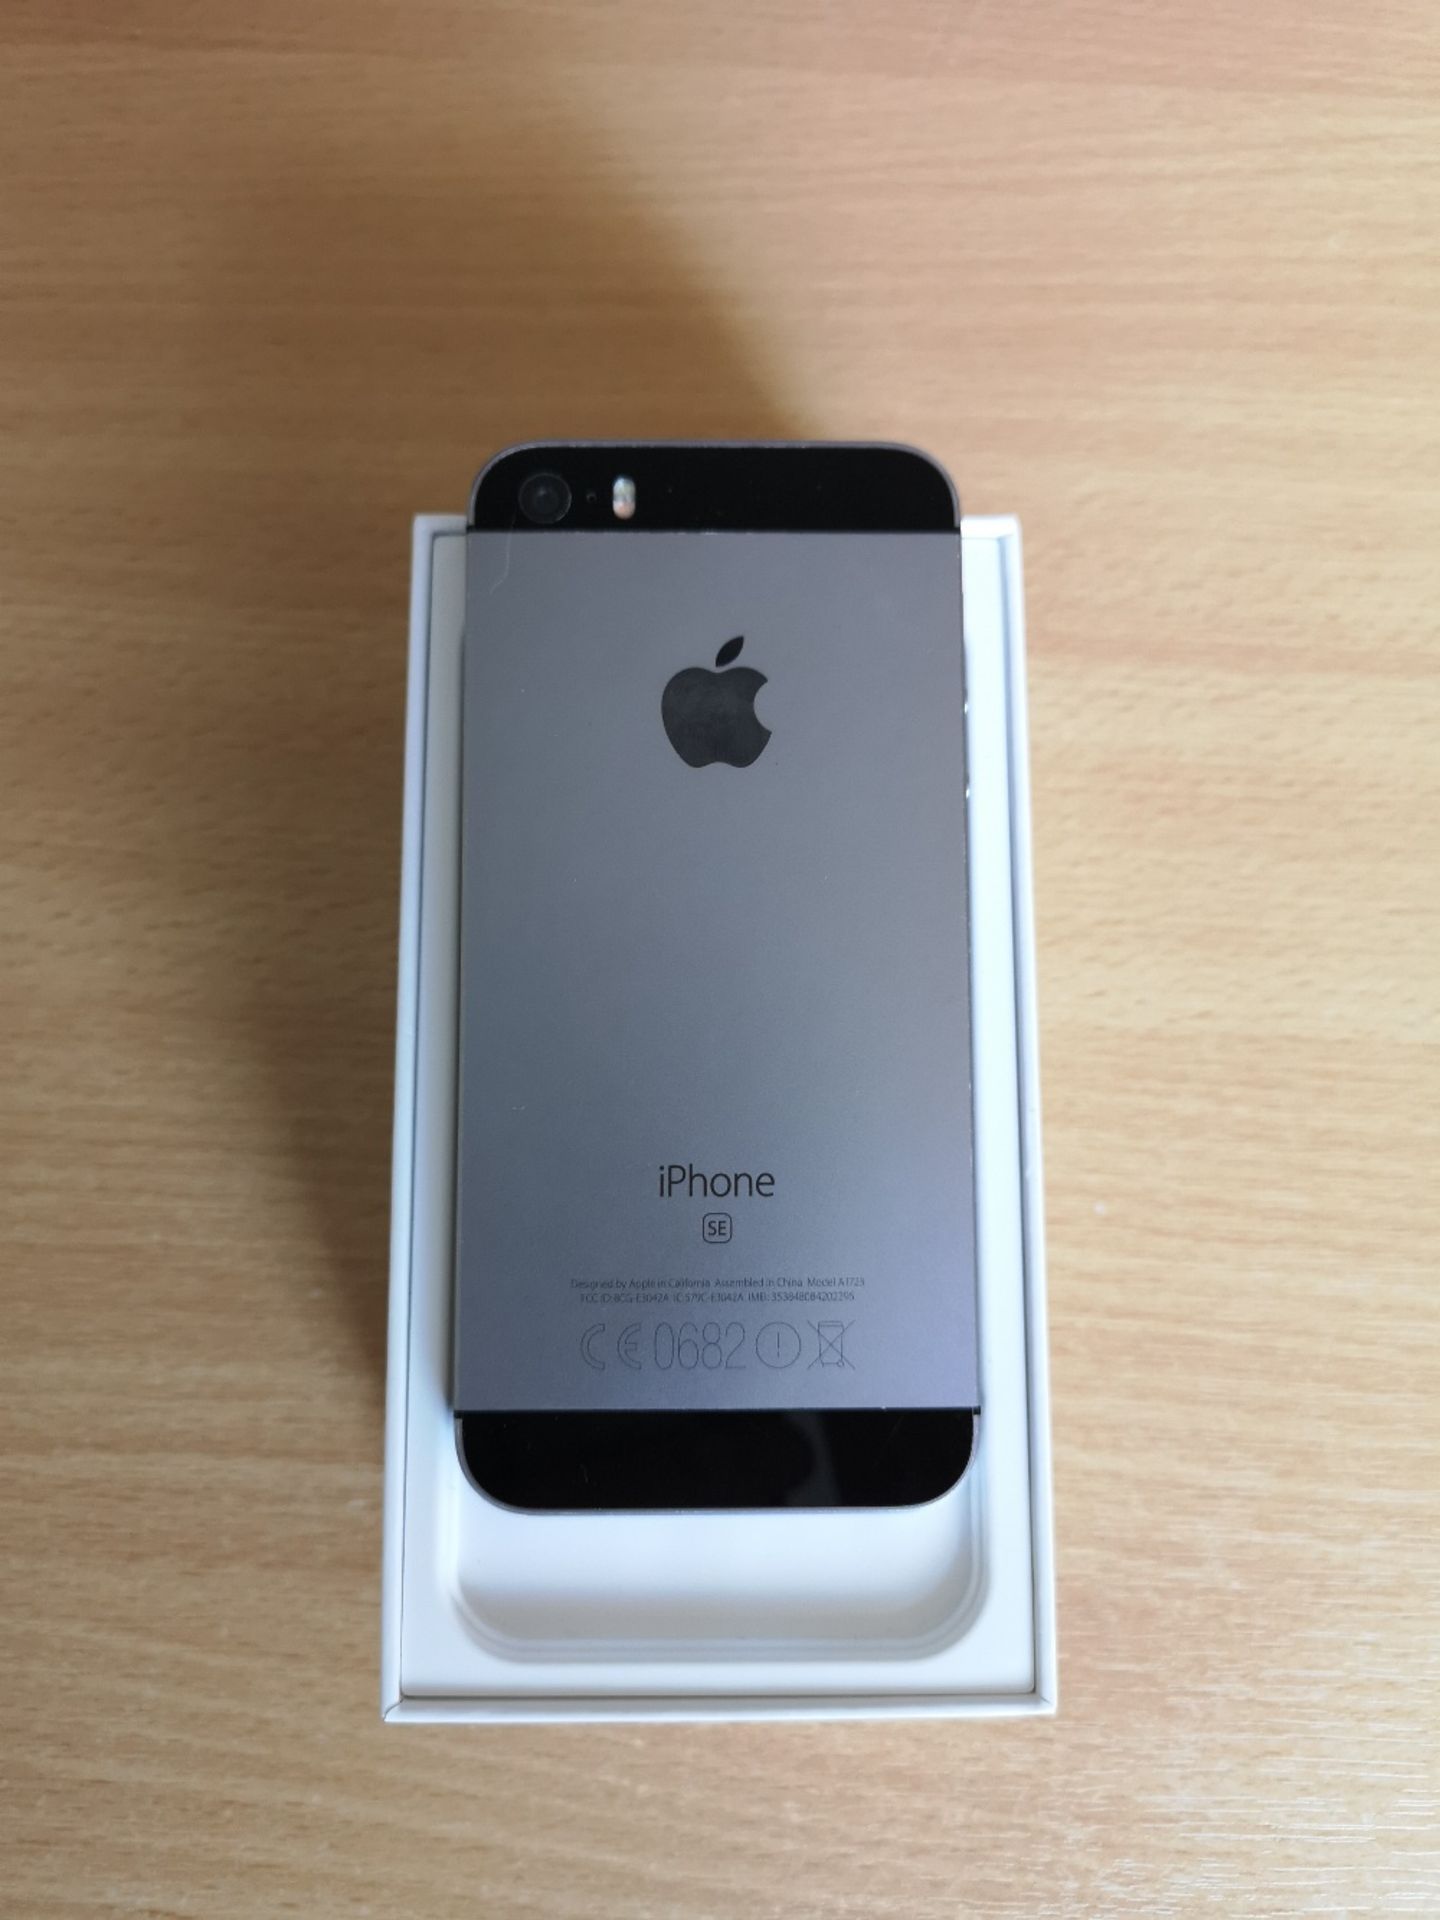 Apple iPhone SE - Space Grey - 16gb - Image 2 of 4